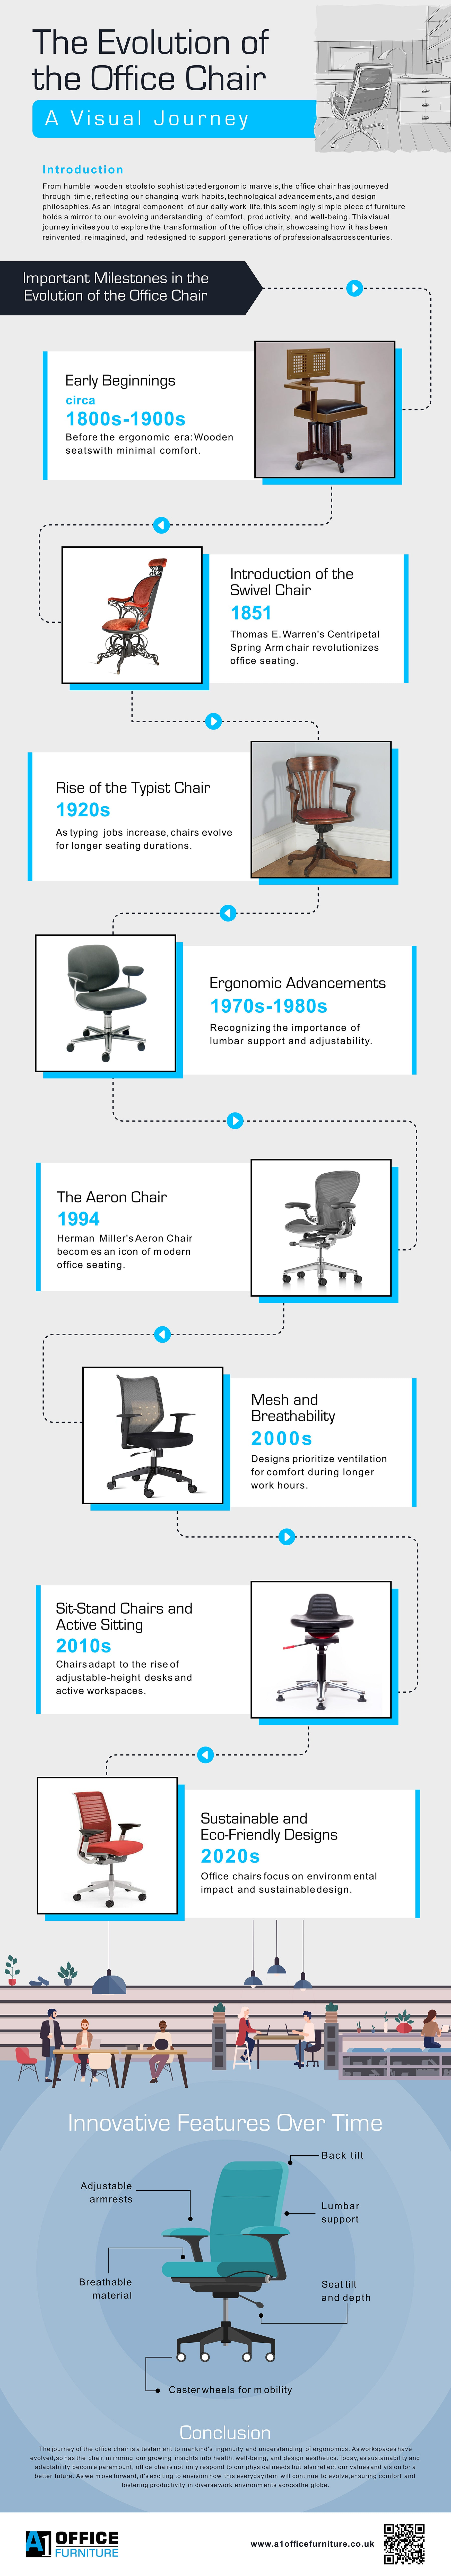 infographic showing different stages of evultion of office chairs across centuries.